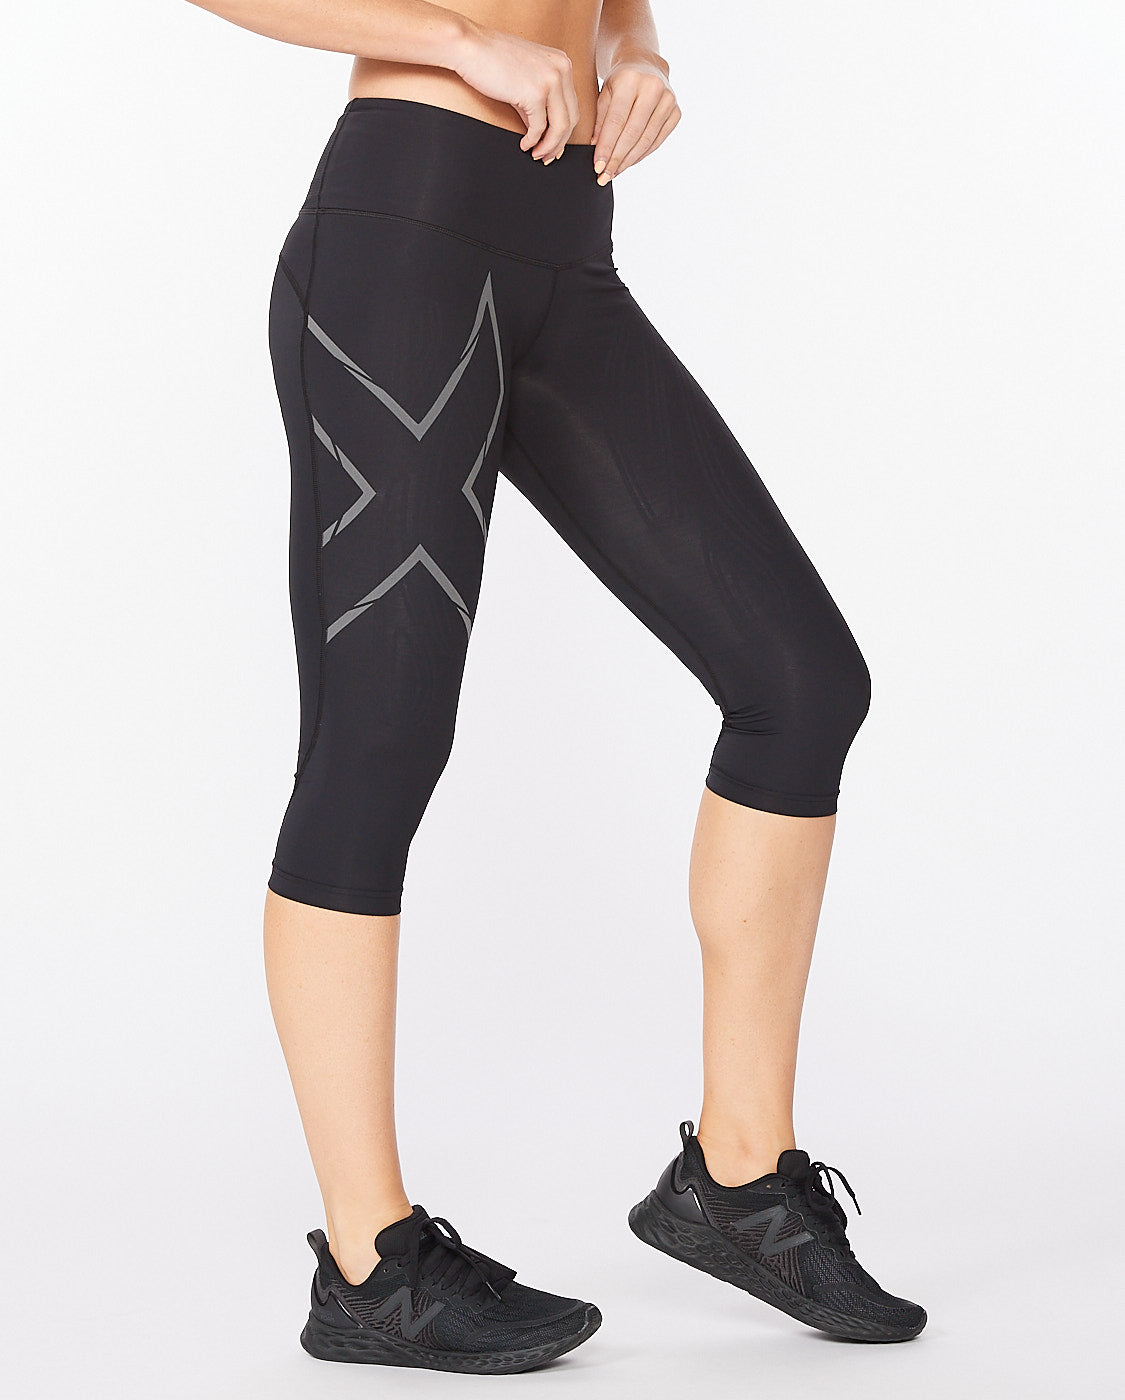 2XU Mid-Rise Compression 3/4 Tight (Women's) Large Only - Keep On Running